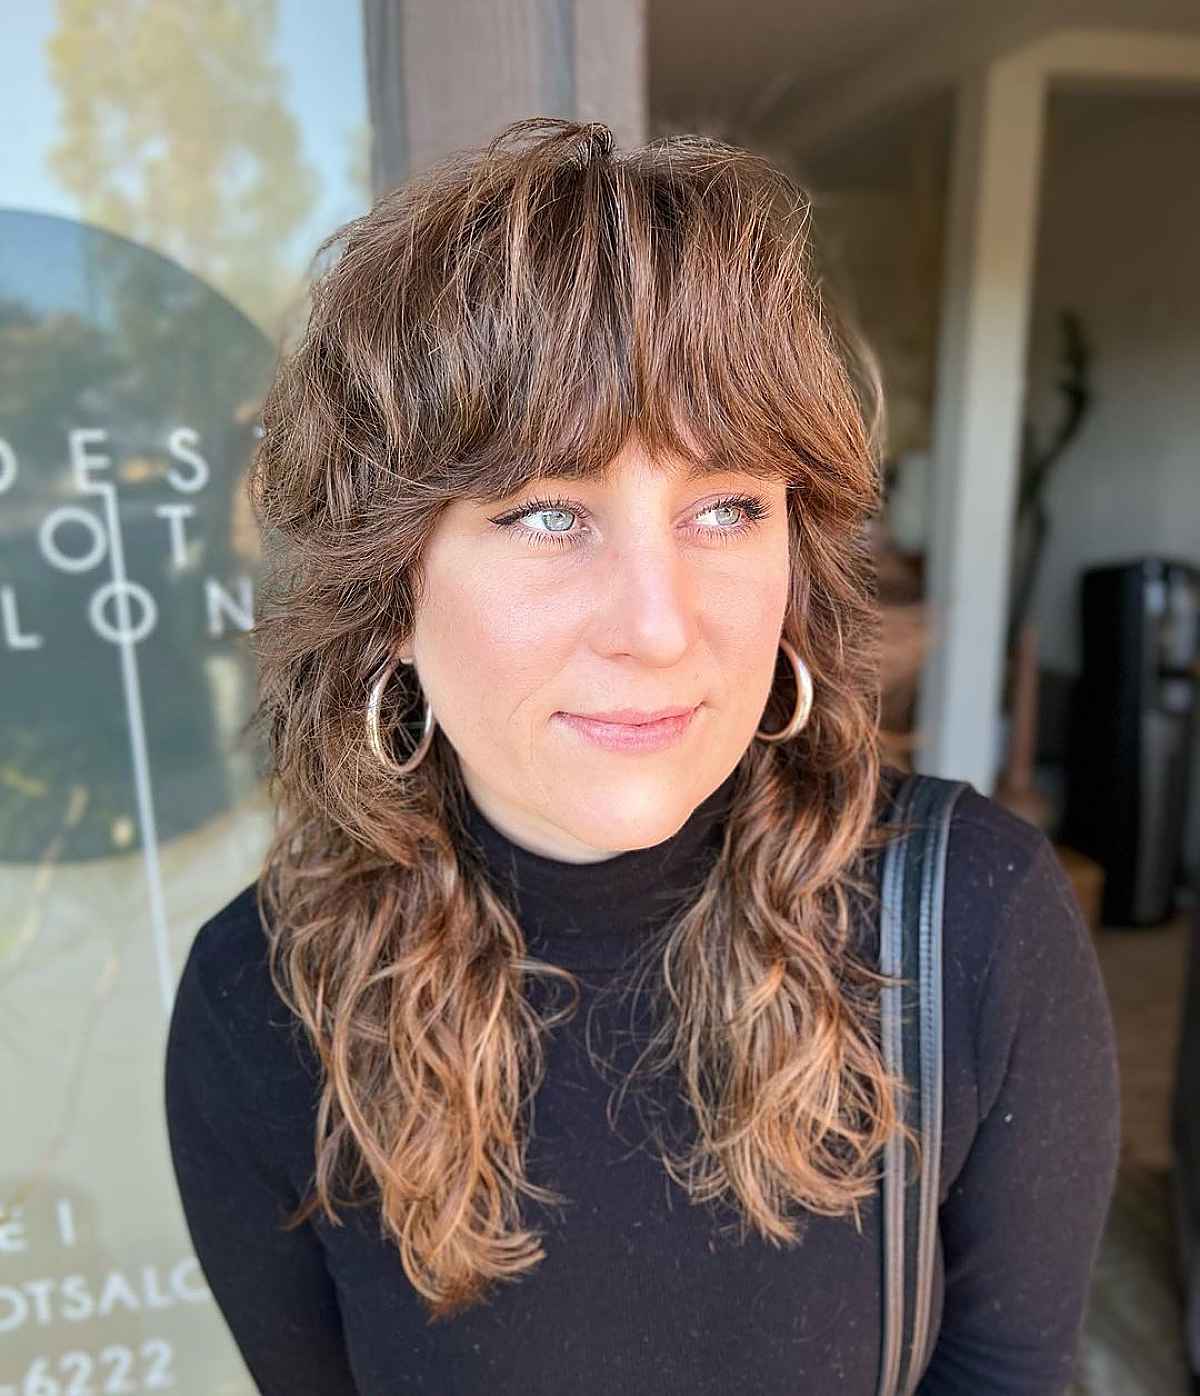 Wavy Shaggy Hairstyle with Brow-Grazing Bangs